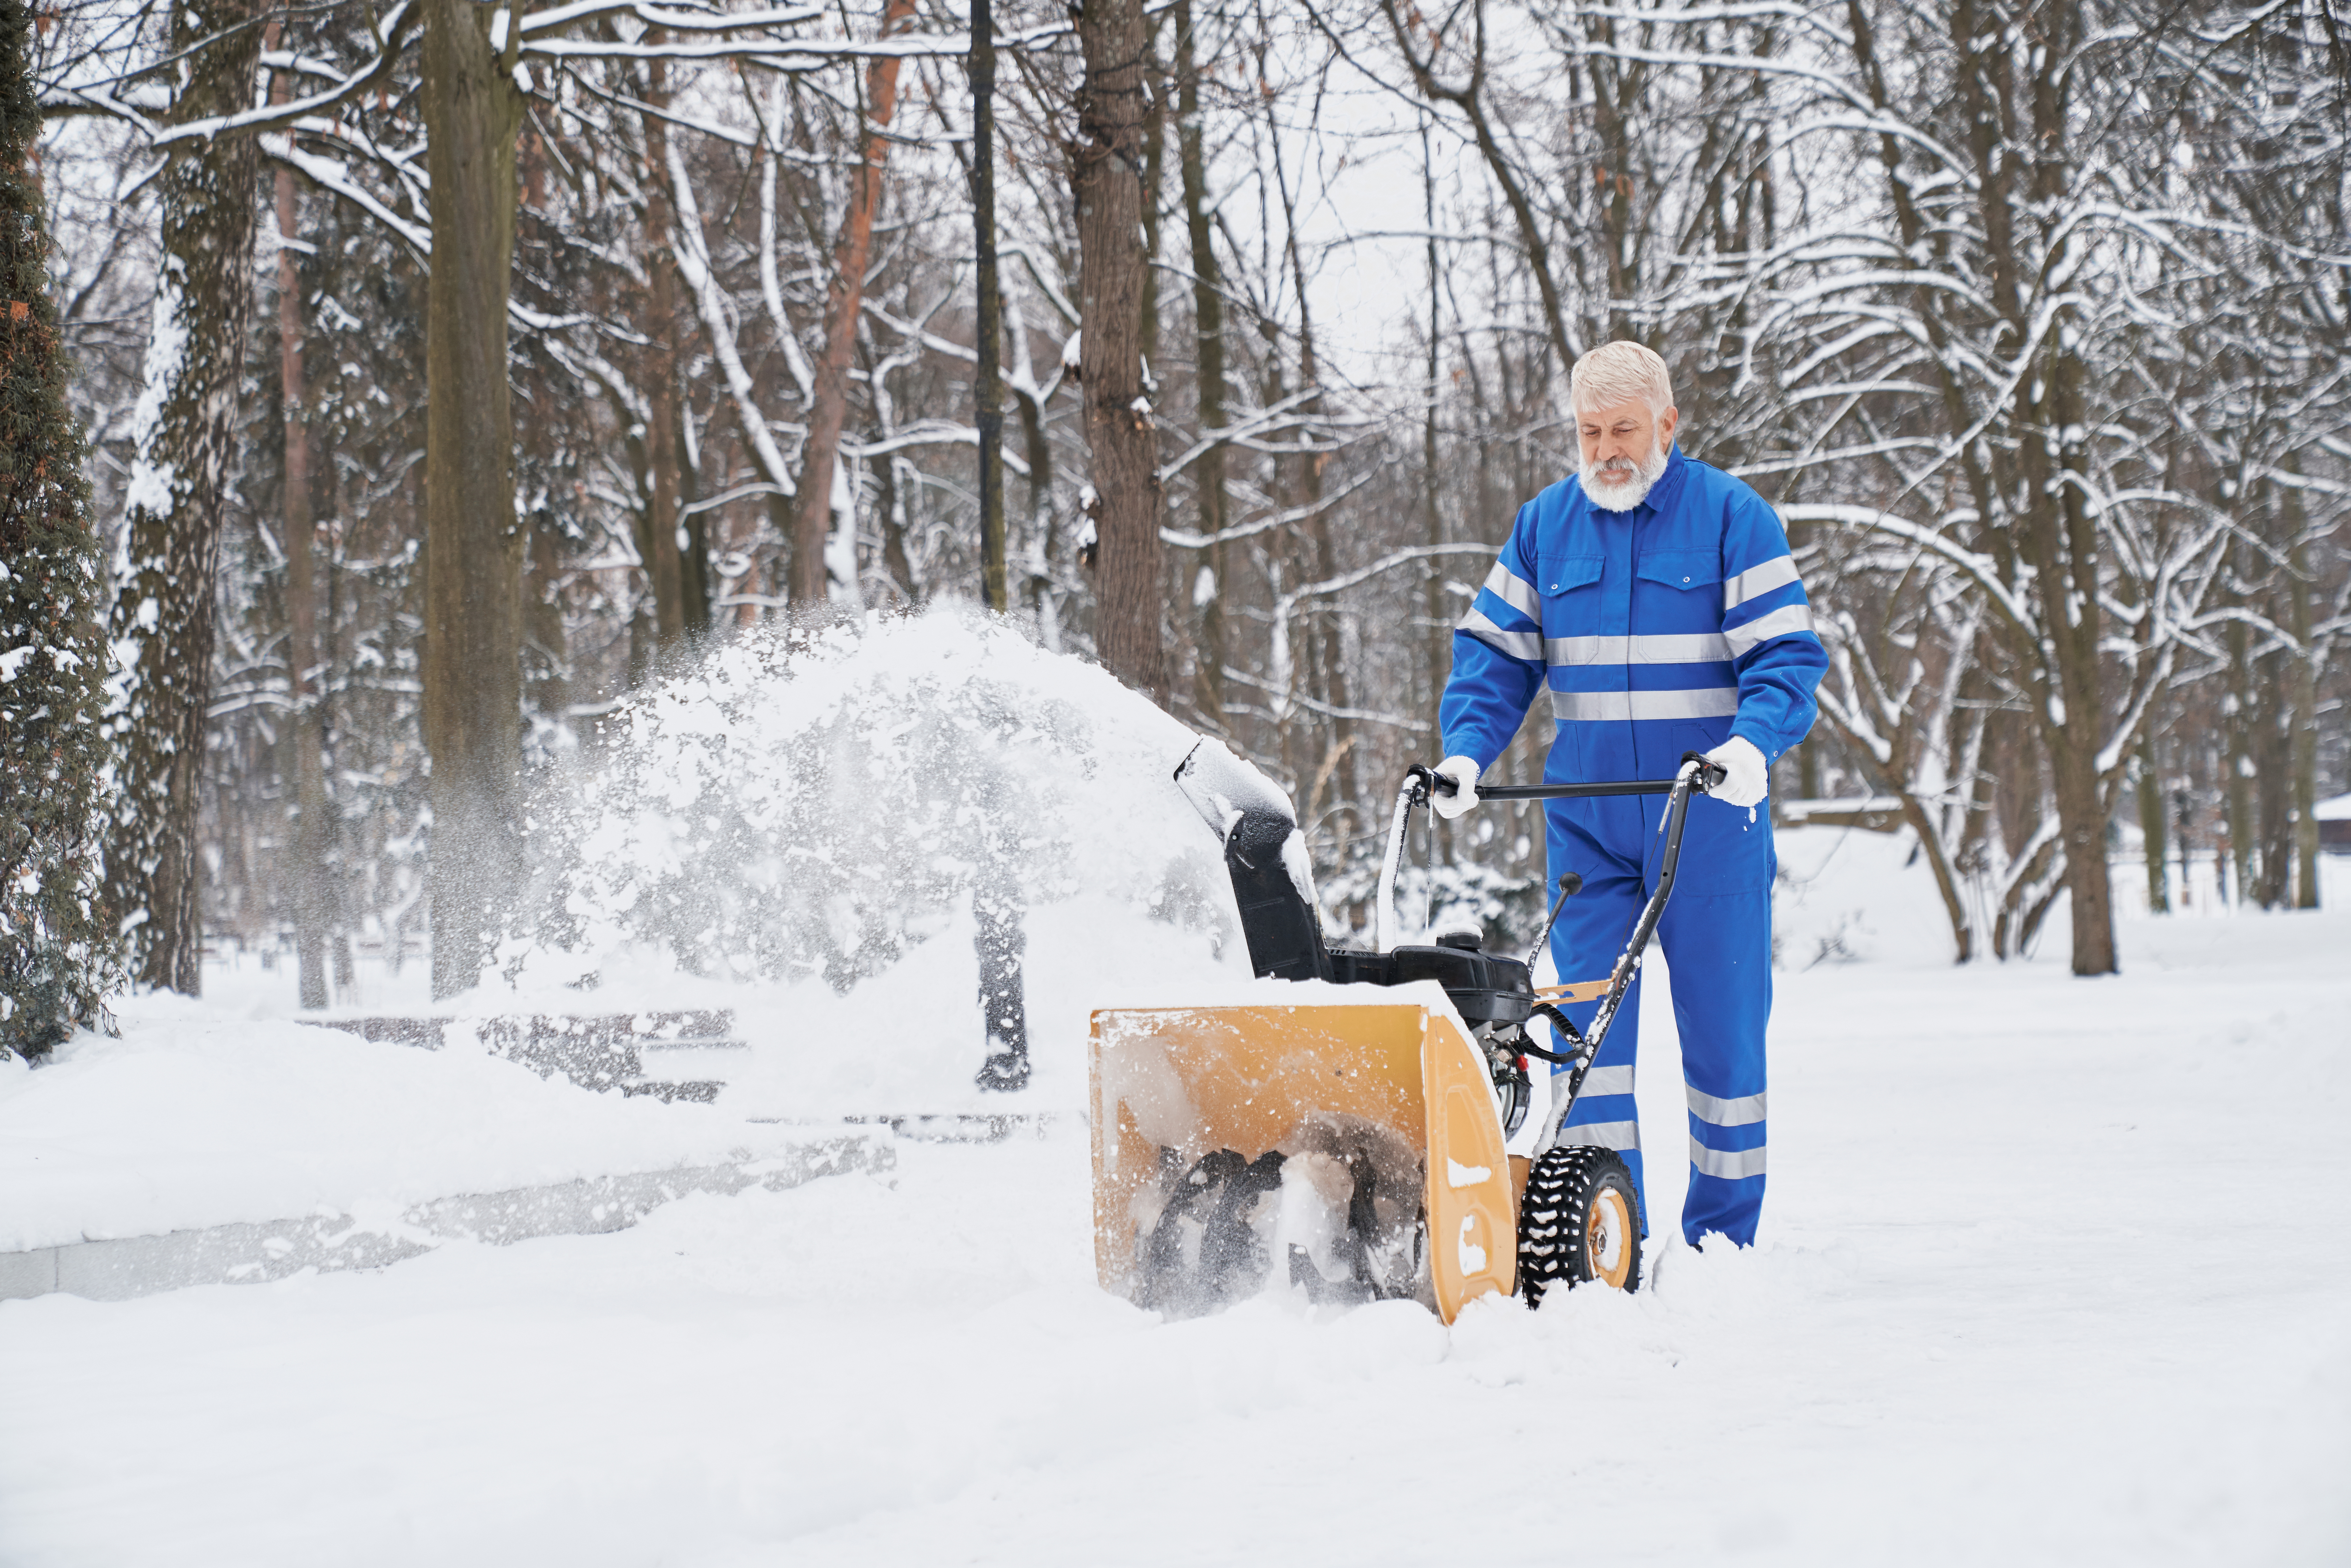 Snow Removal vs. Snow Management: What's the Difference?